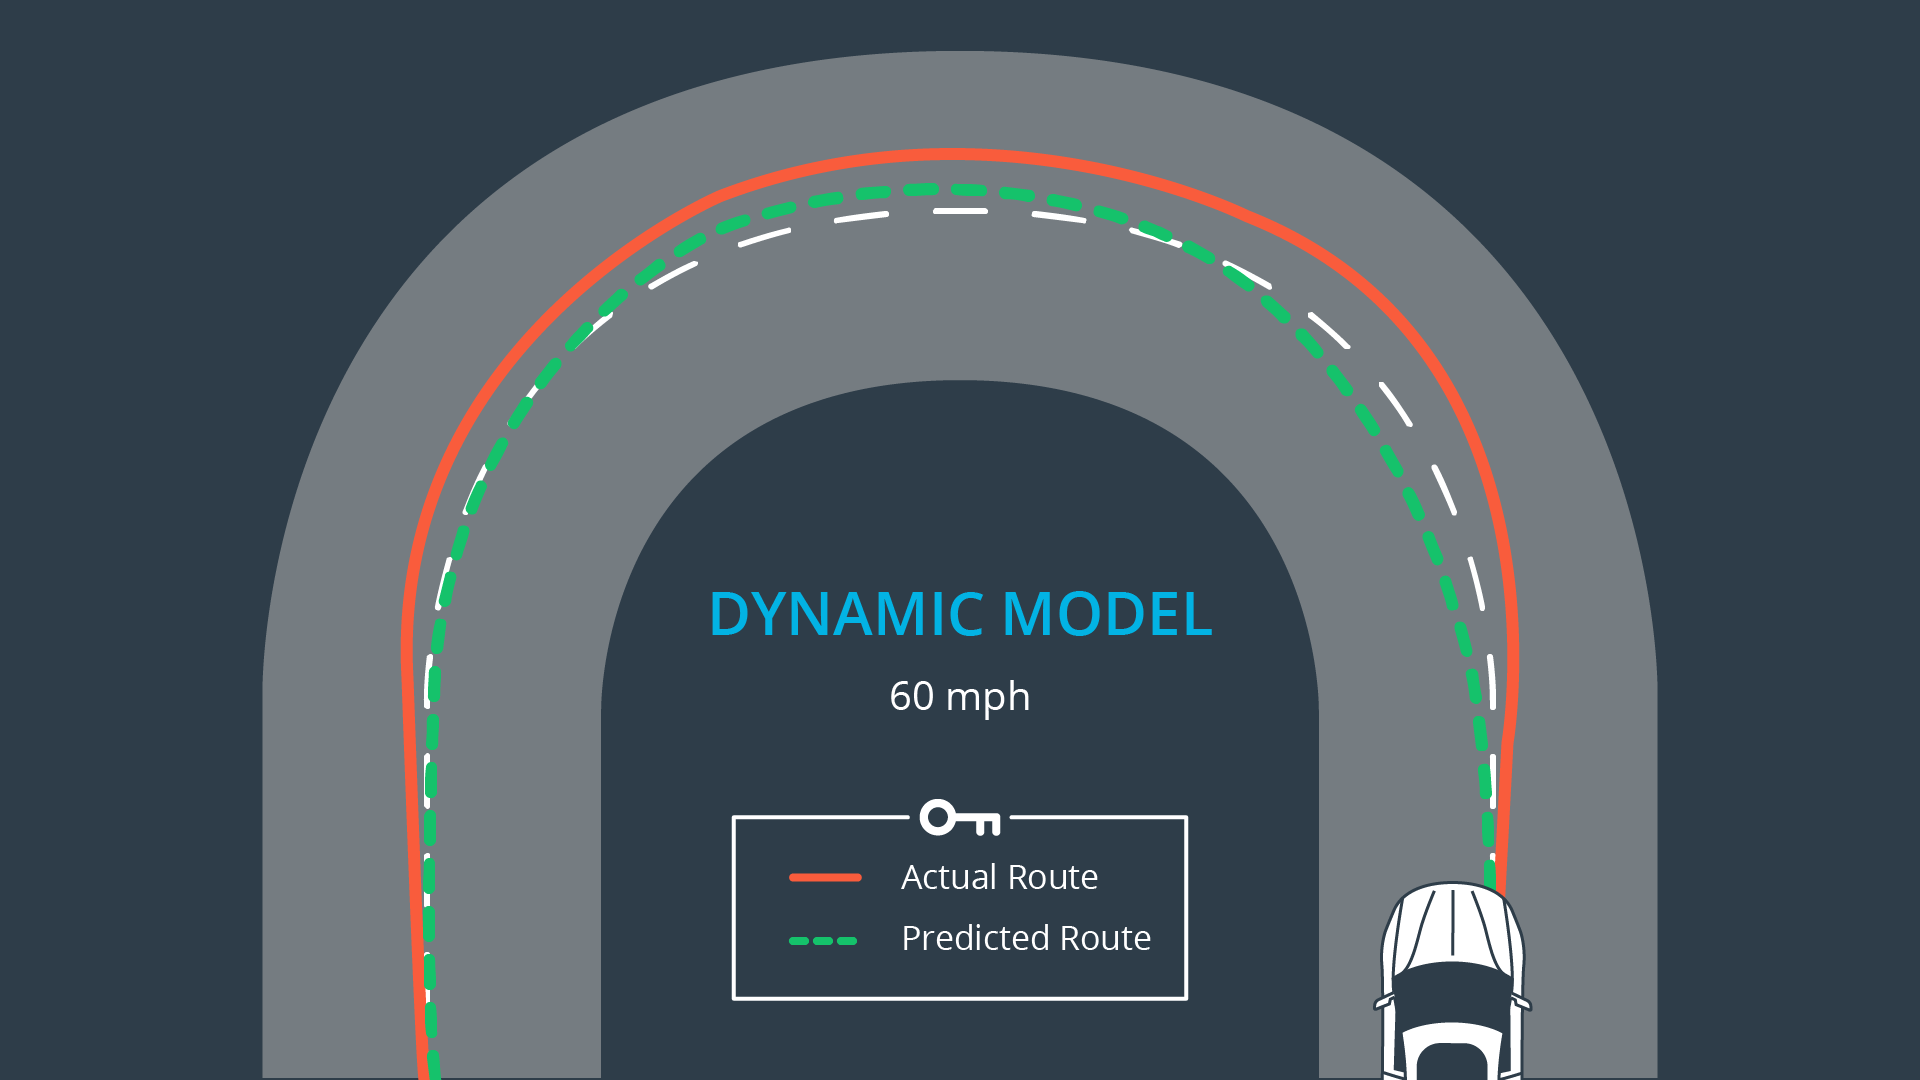 The dynamic model is able to stay on the road, knowledge of forces is embedded in the model.